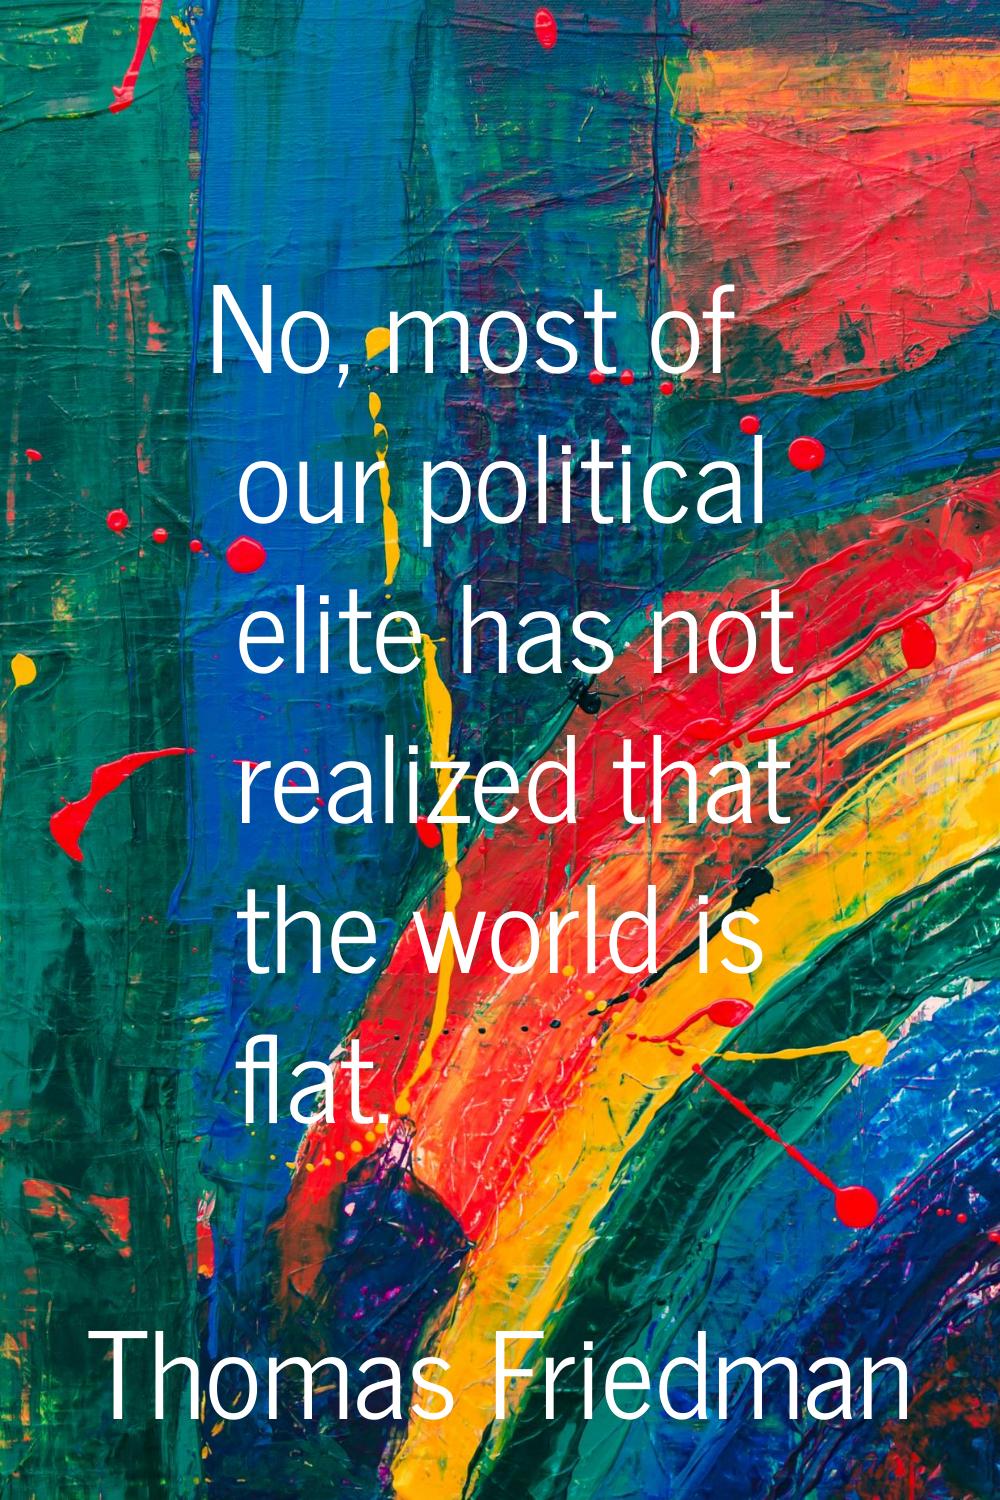 No, most of our political elite has not realized that the world is flat.